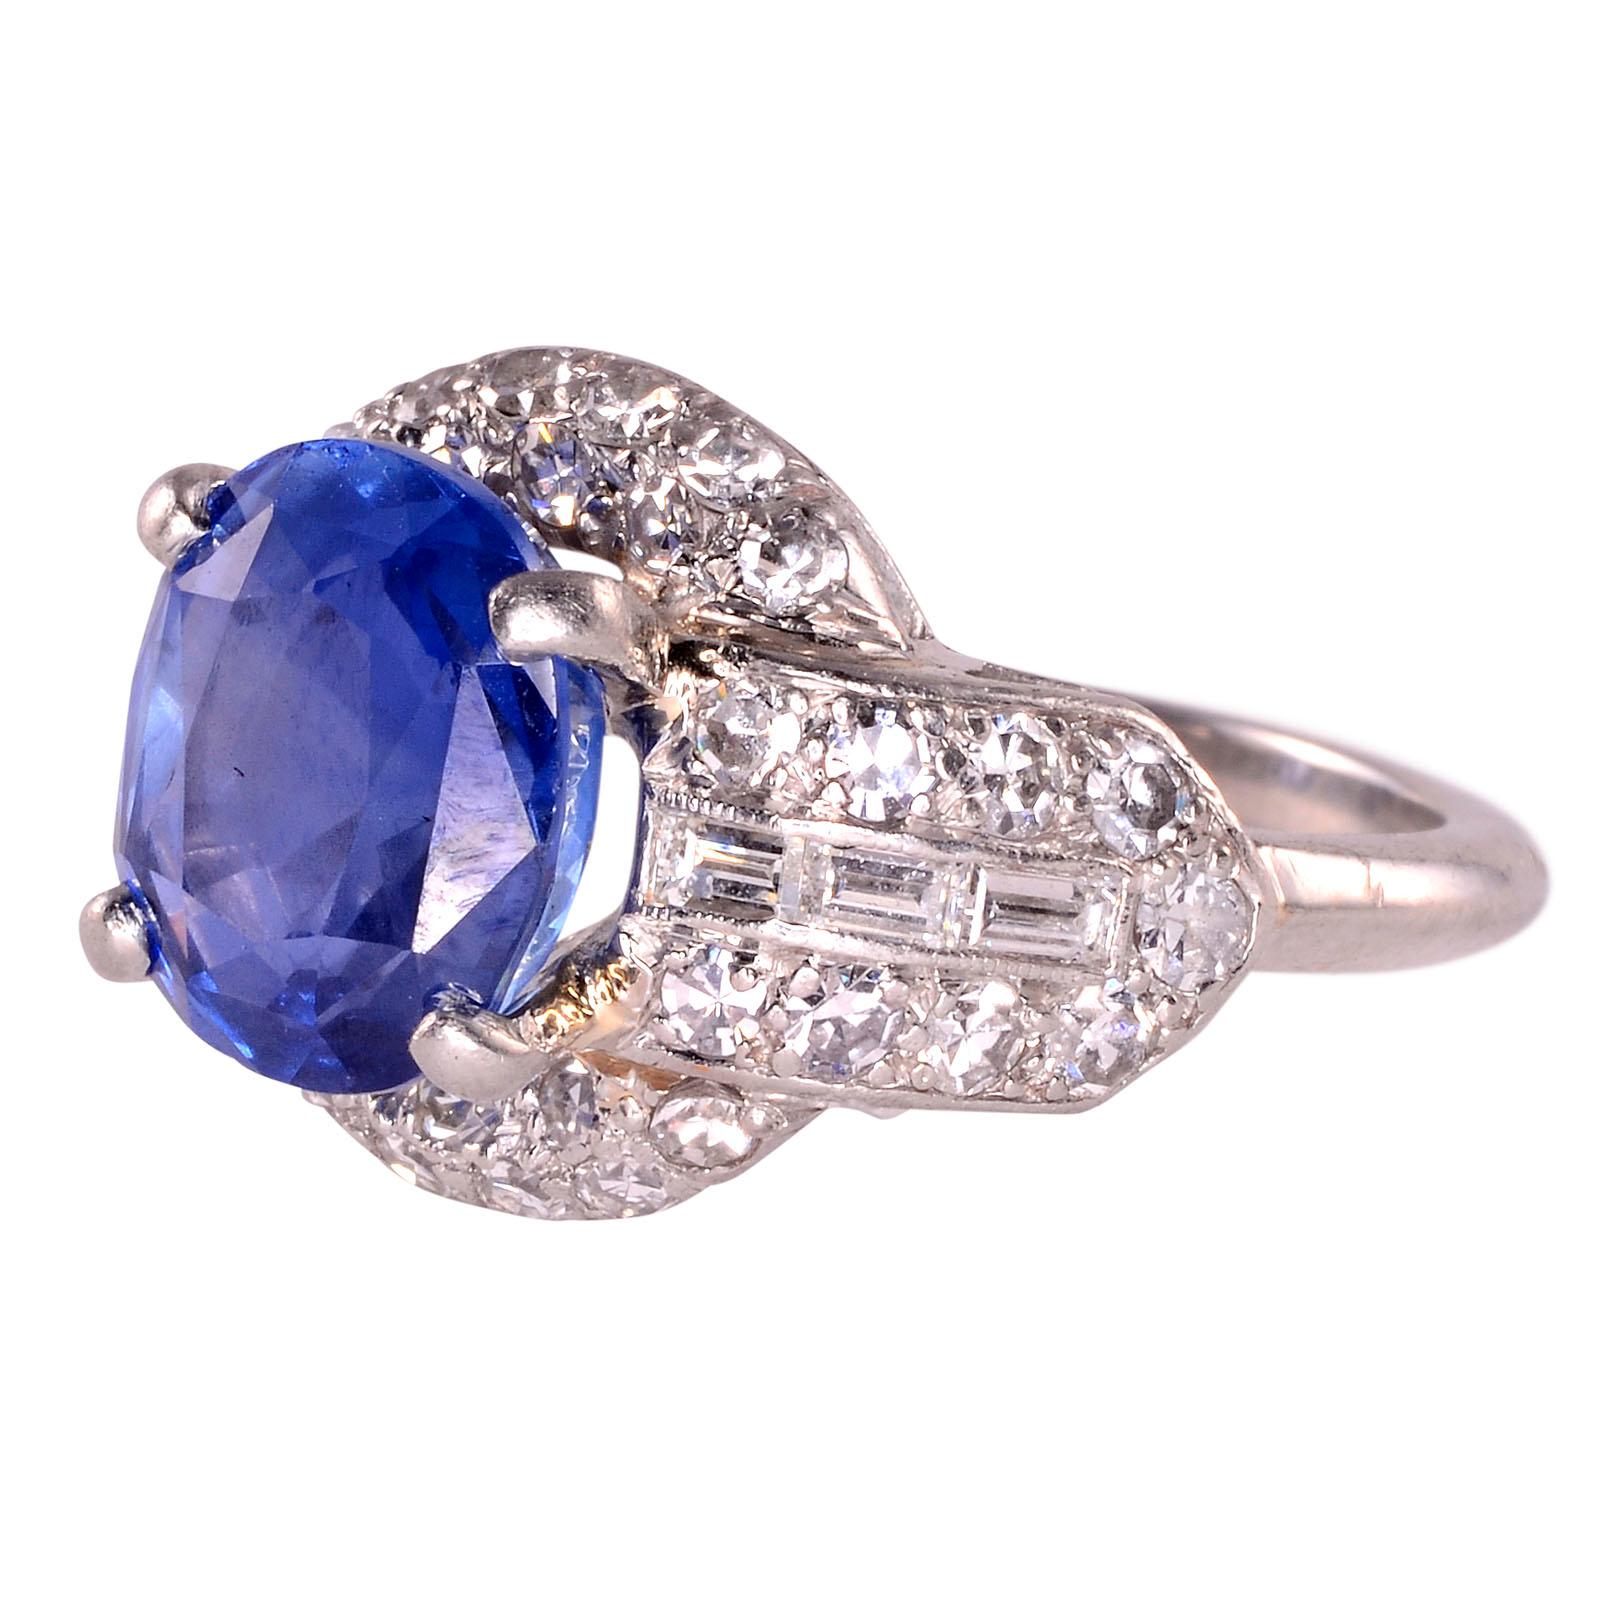 Vintage 3.60 carat oval sapphire and diamond platinum ring, circa 1930. This platinum ring has one center oval sapphire at 3.60 carats. The vintage sapphire ring is accented with 36 single cut diamonds at 0.86 carat total weight having VS1 clarity